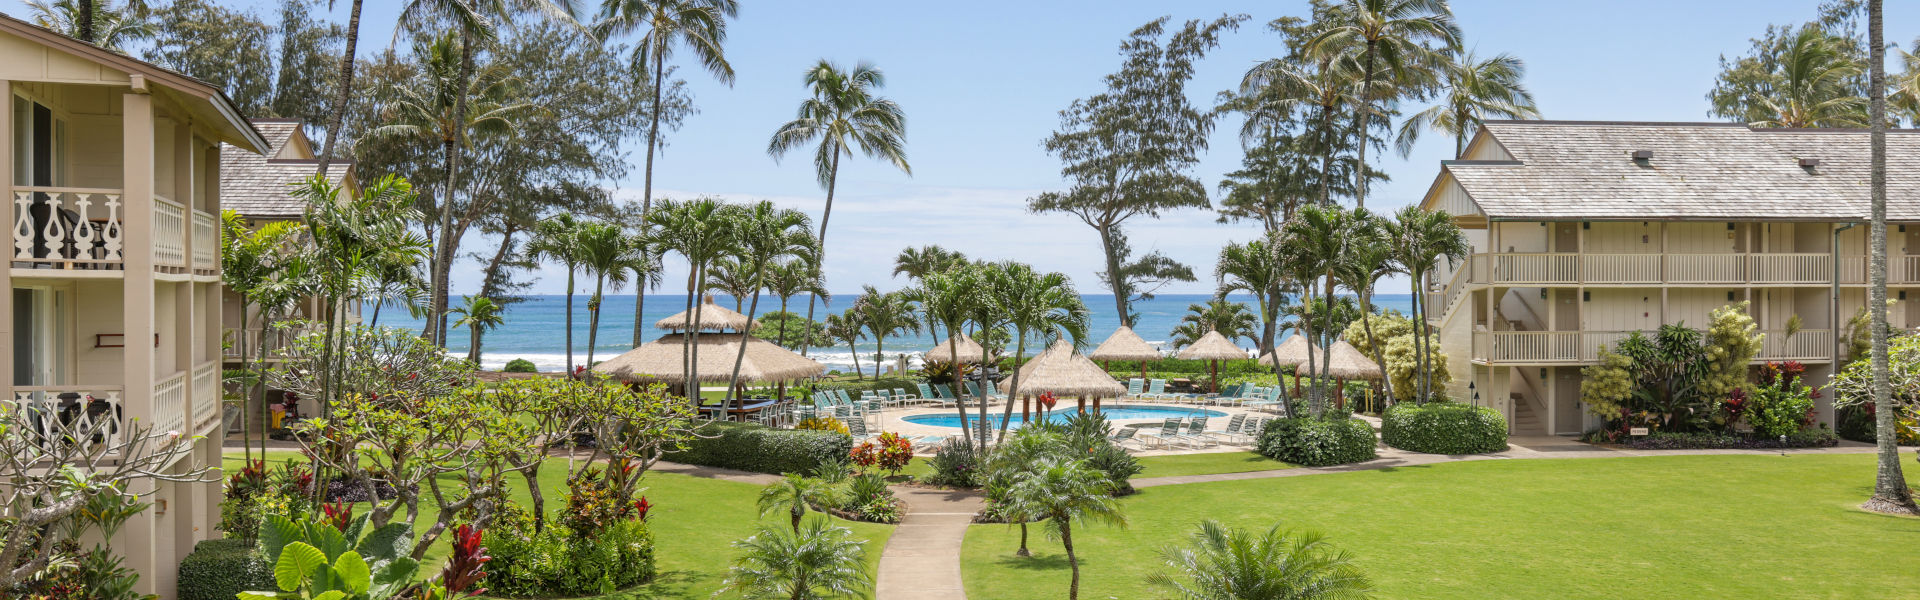 Aston Islander on the Beach lush grounds with palms trees, pool and access to the beach